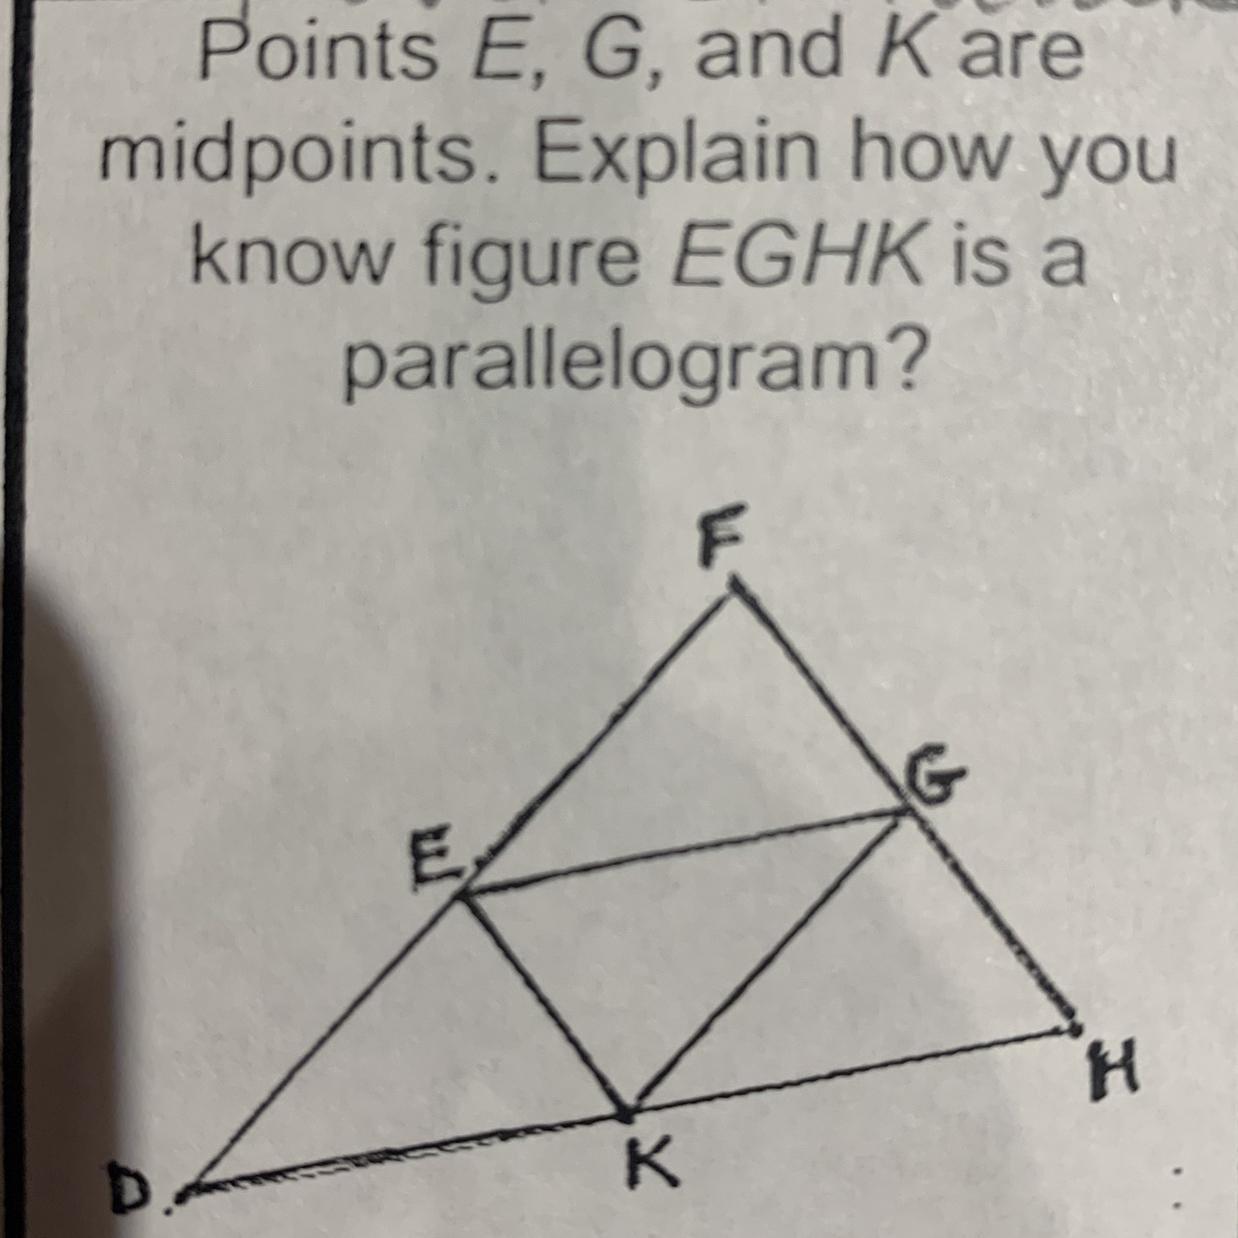 Points EGNK Or Midpoints Explain How You Know Figure EGHK Is A Parallelogram